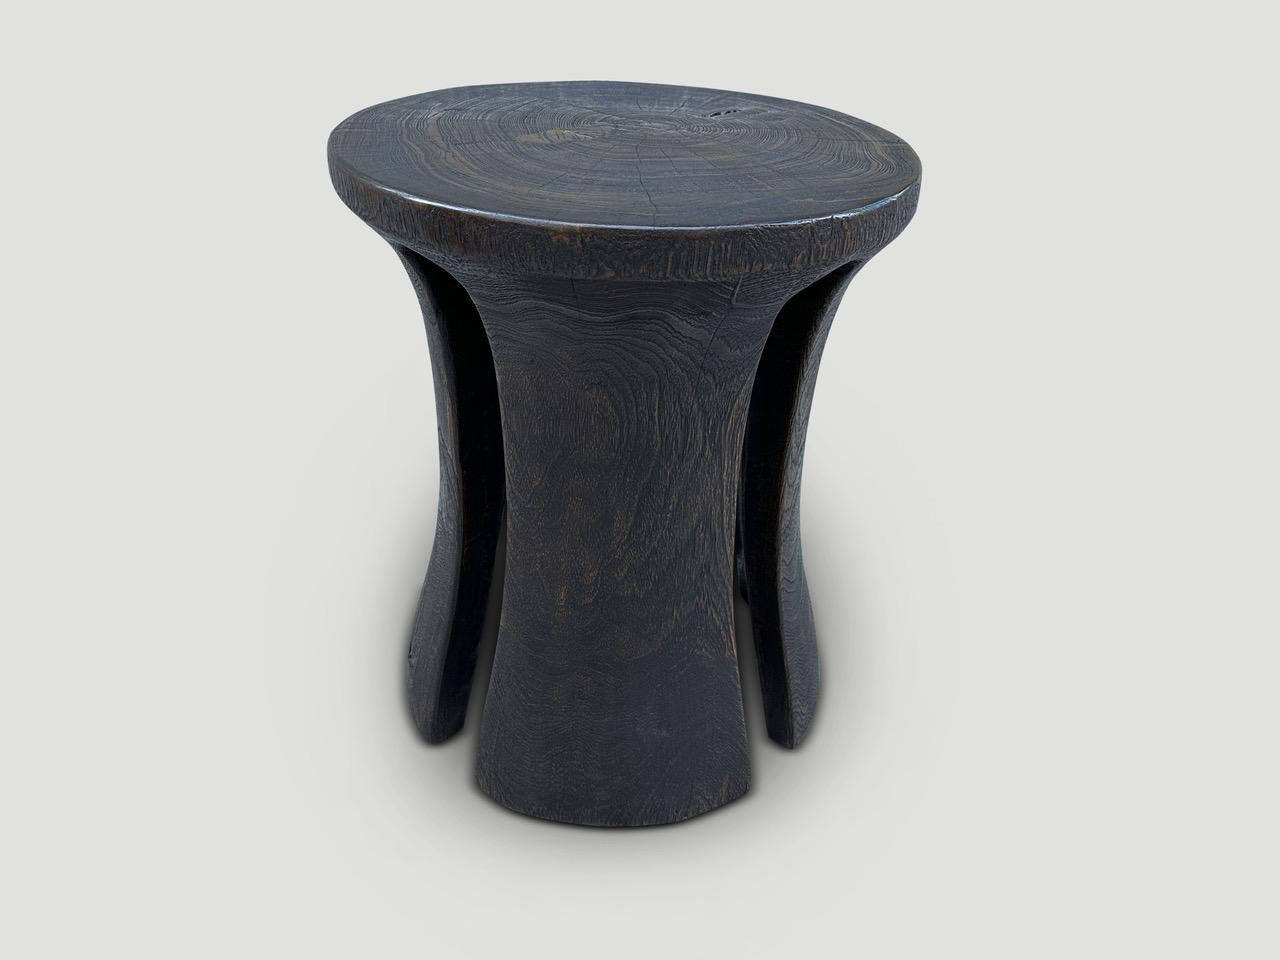 Wood Andrianna Shamaris Sculptural Side Table or Stool